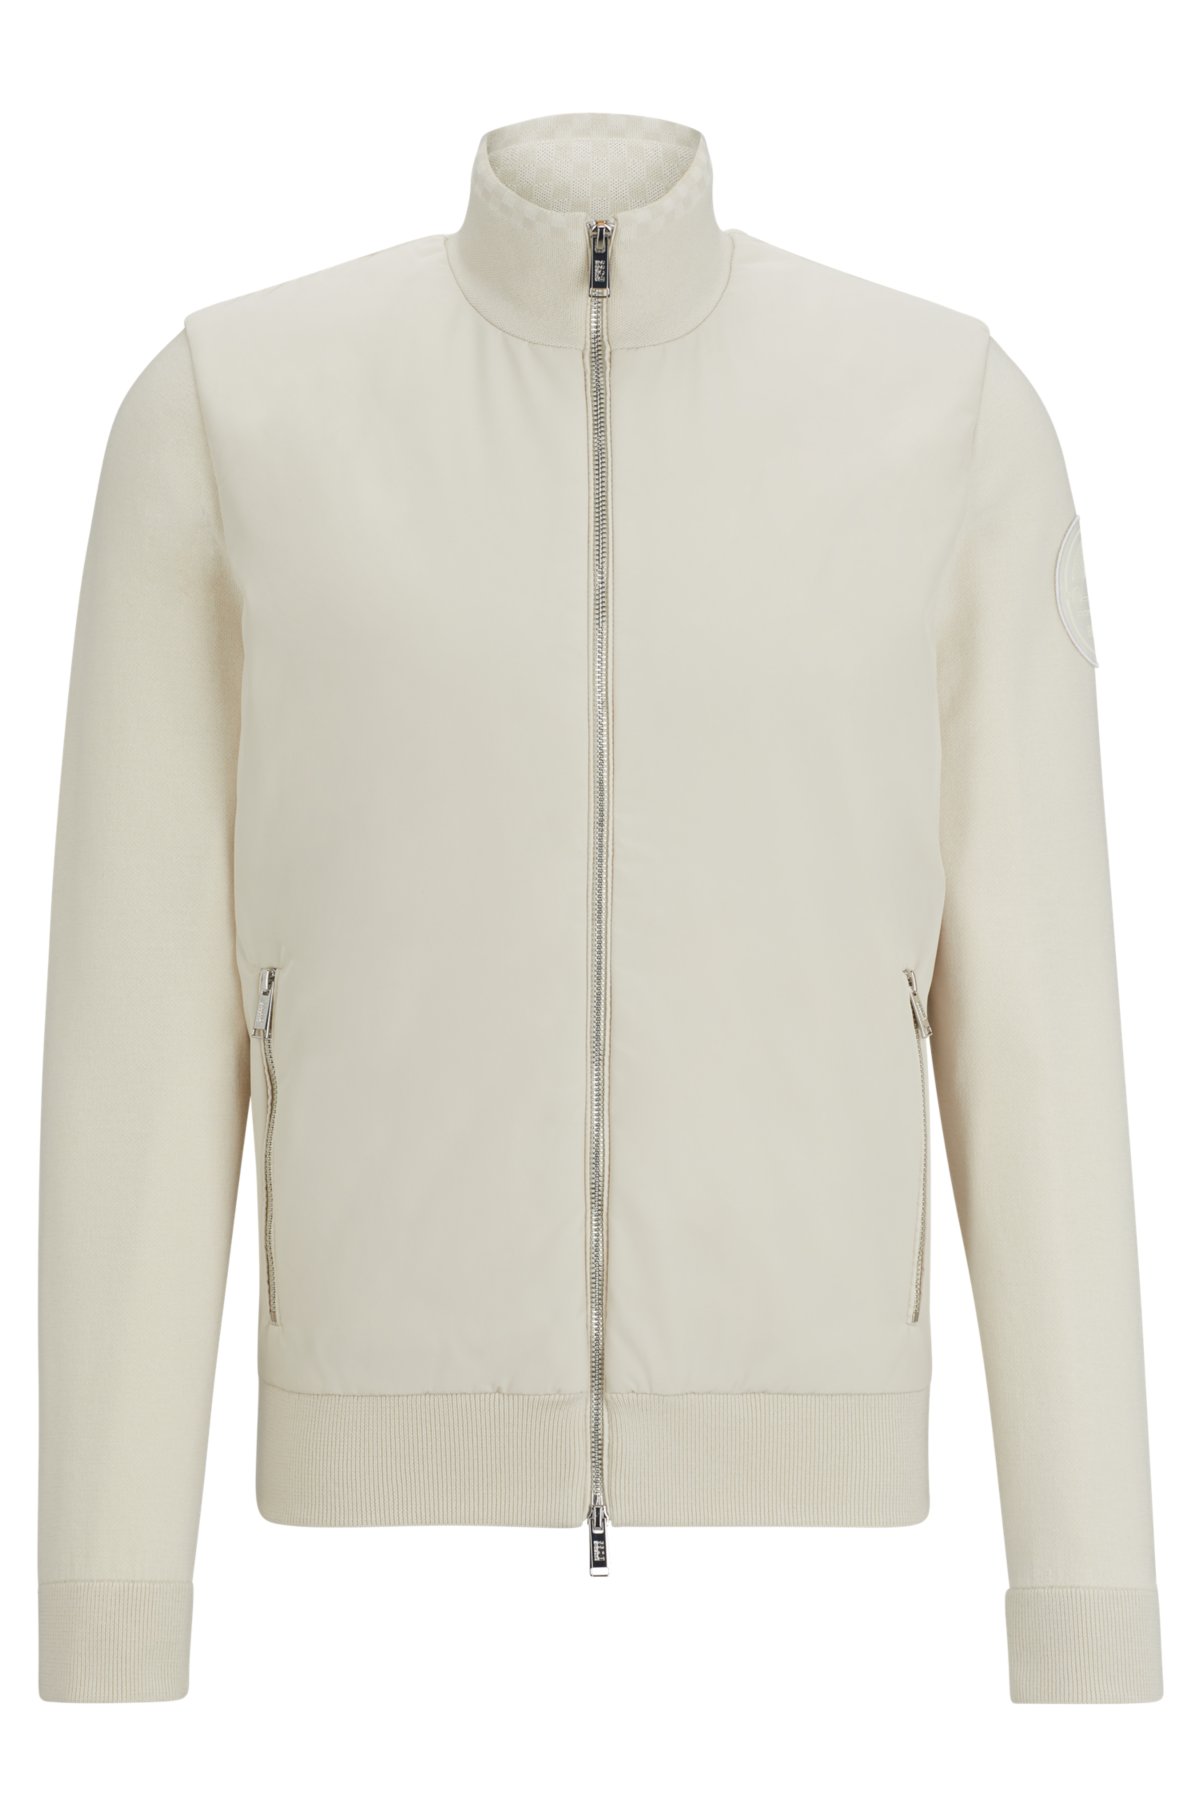 Porsche x BOSS mixed-material jacket with special branding, Natural